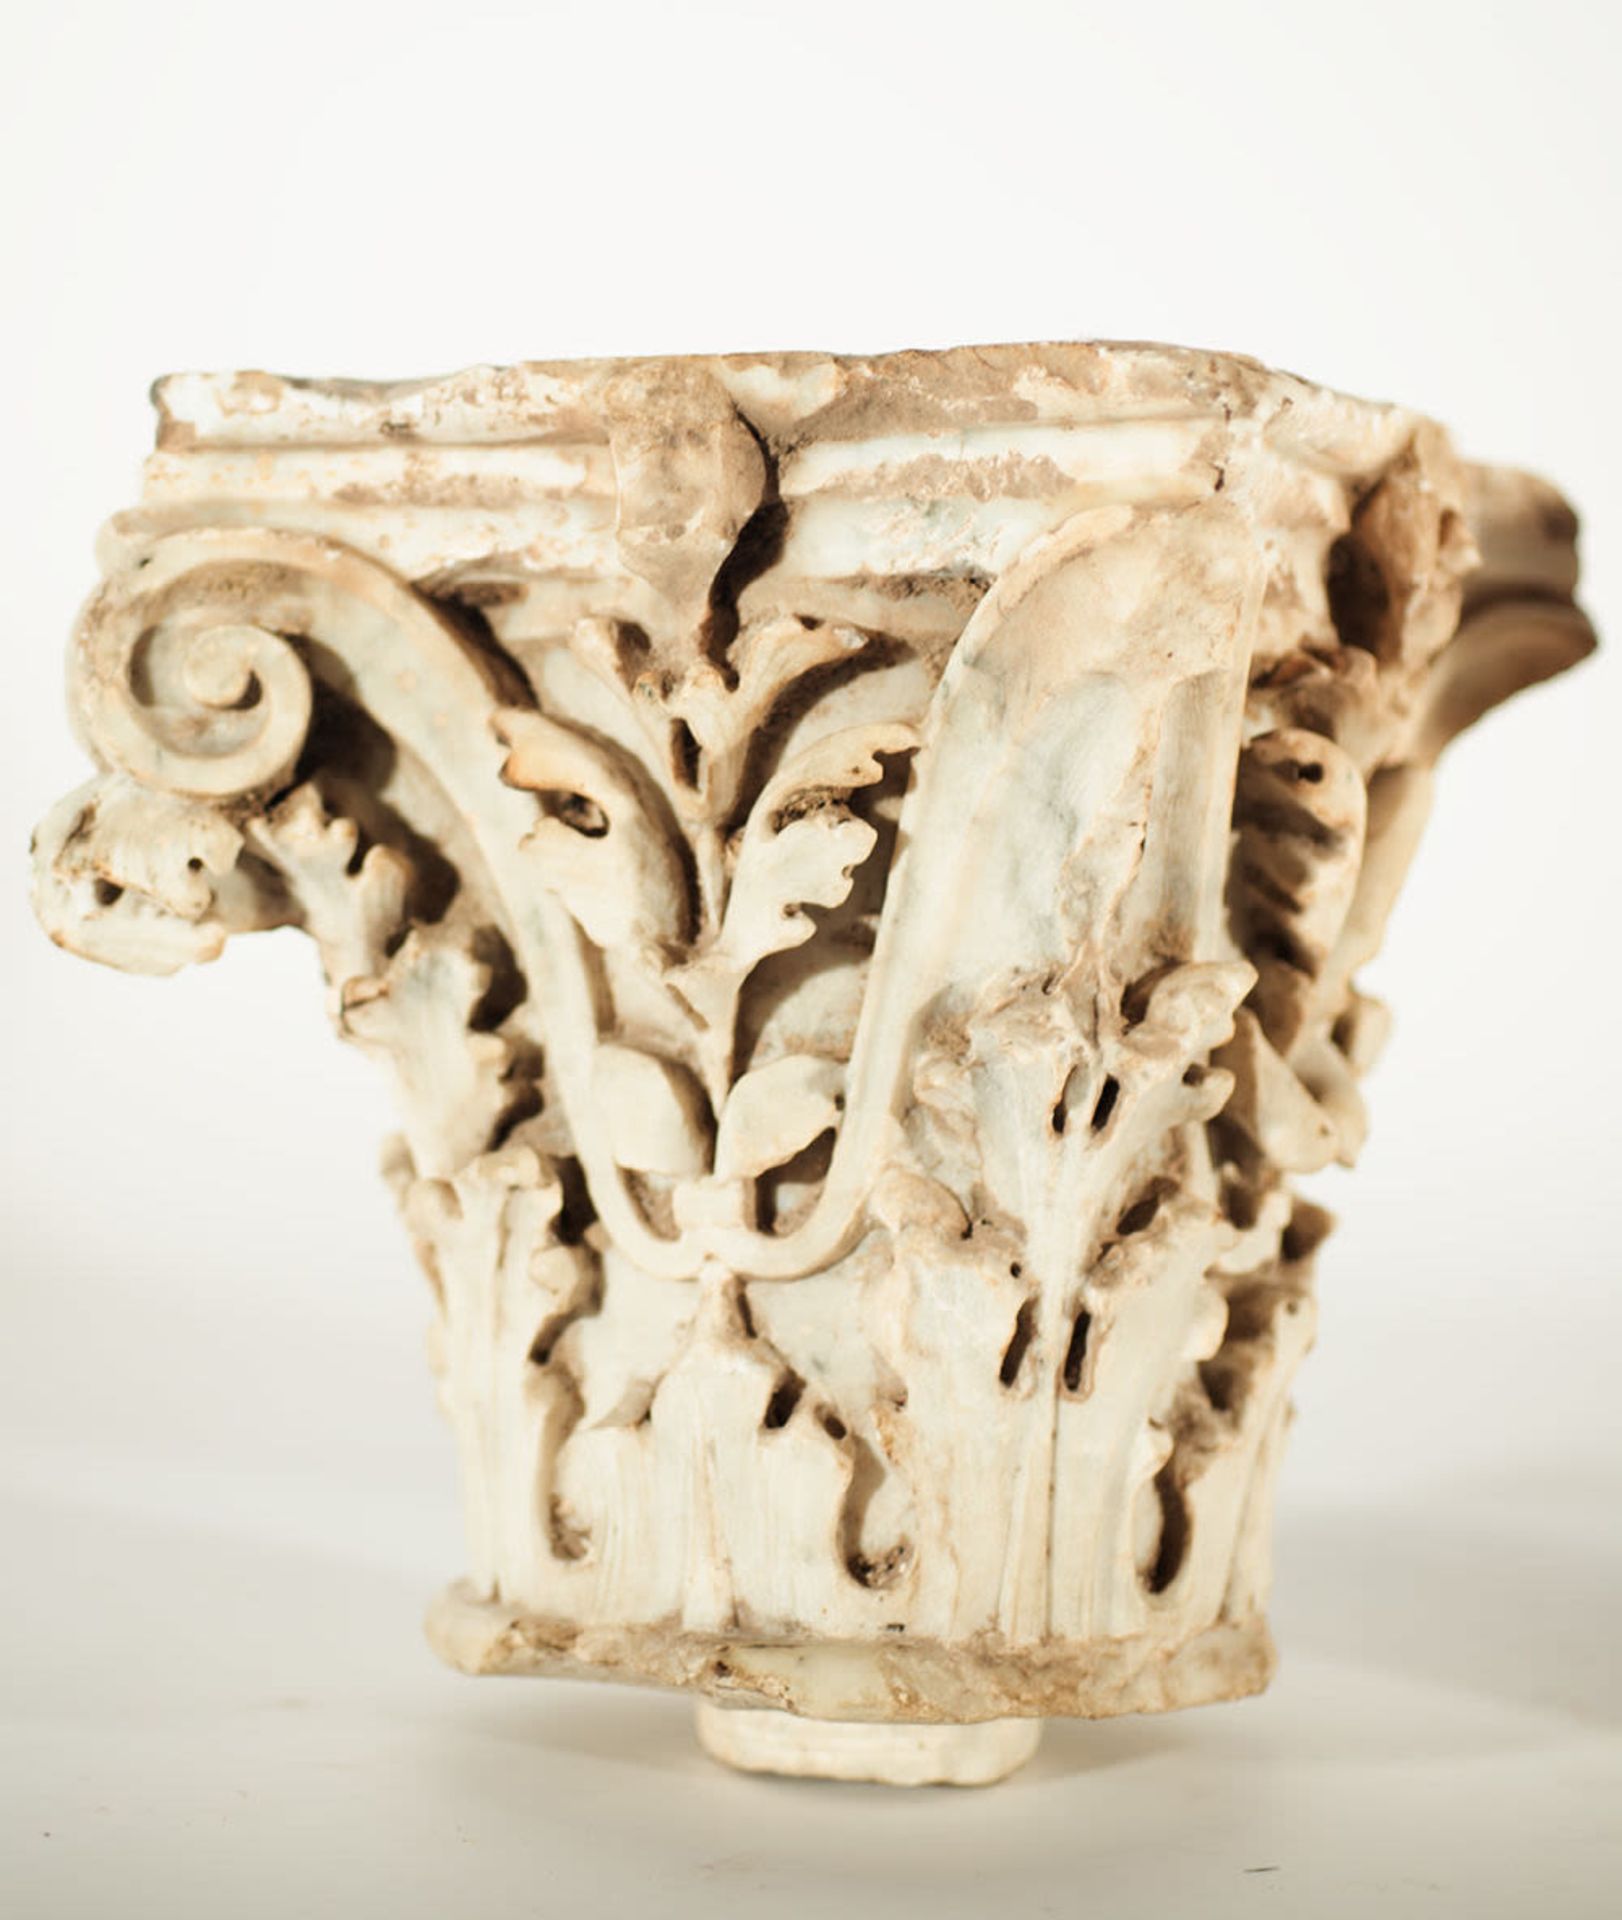 Magnificent Pair of Corinthian Capitals in white marble, possibly Italian and 14th - 15th centuries - Image 3 of 4